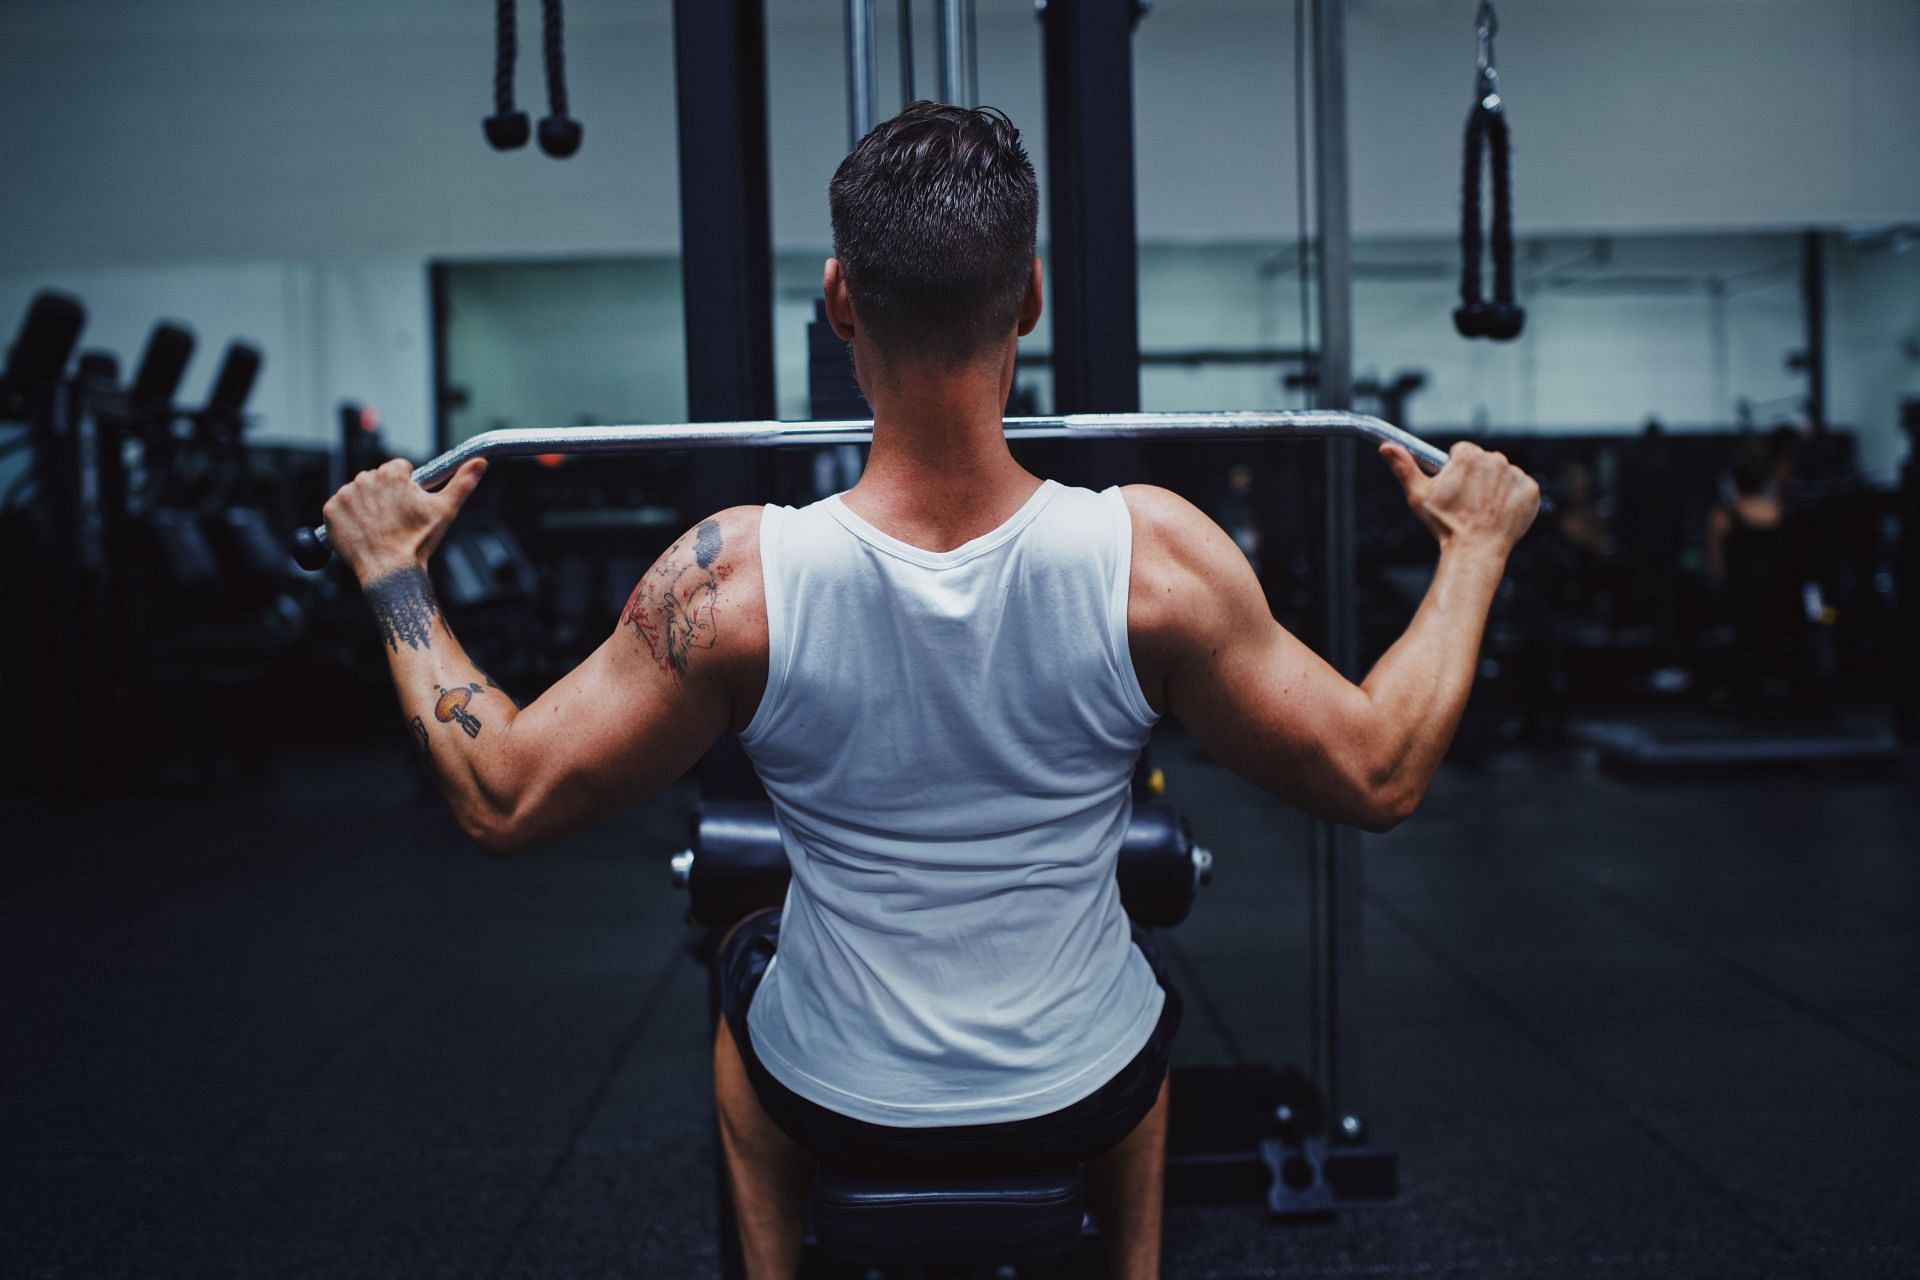 Try push-pull exercise for massive gains. (Image via Unsplash/ Gordon Cowie)